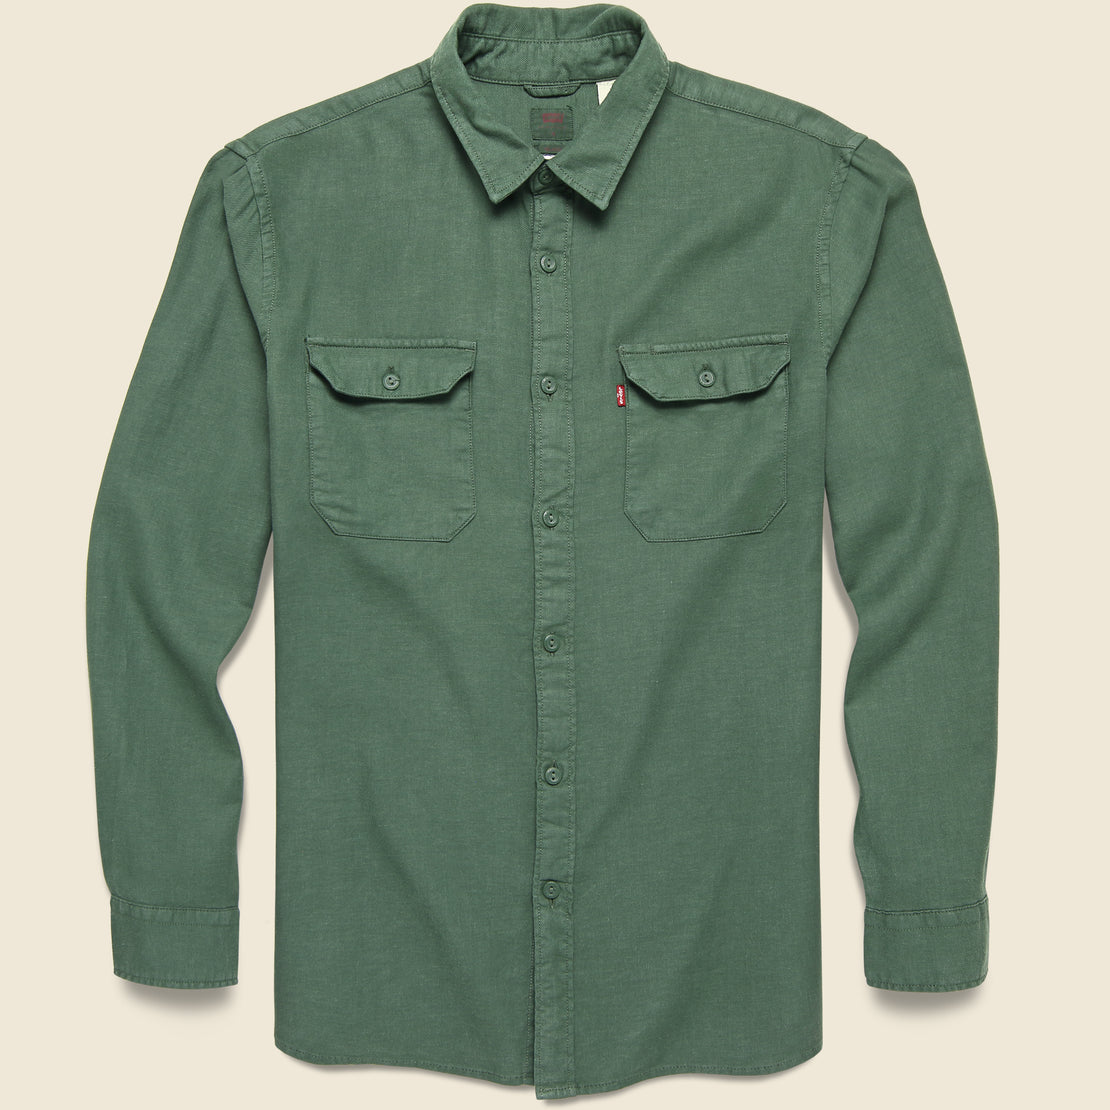 Jackson Worker Shirt - Flying Owl - Fort Lonesome - STAG Provisions - Tops - L/S Woven - Other Pattern